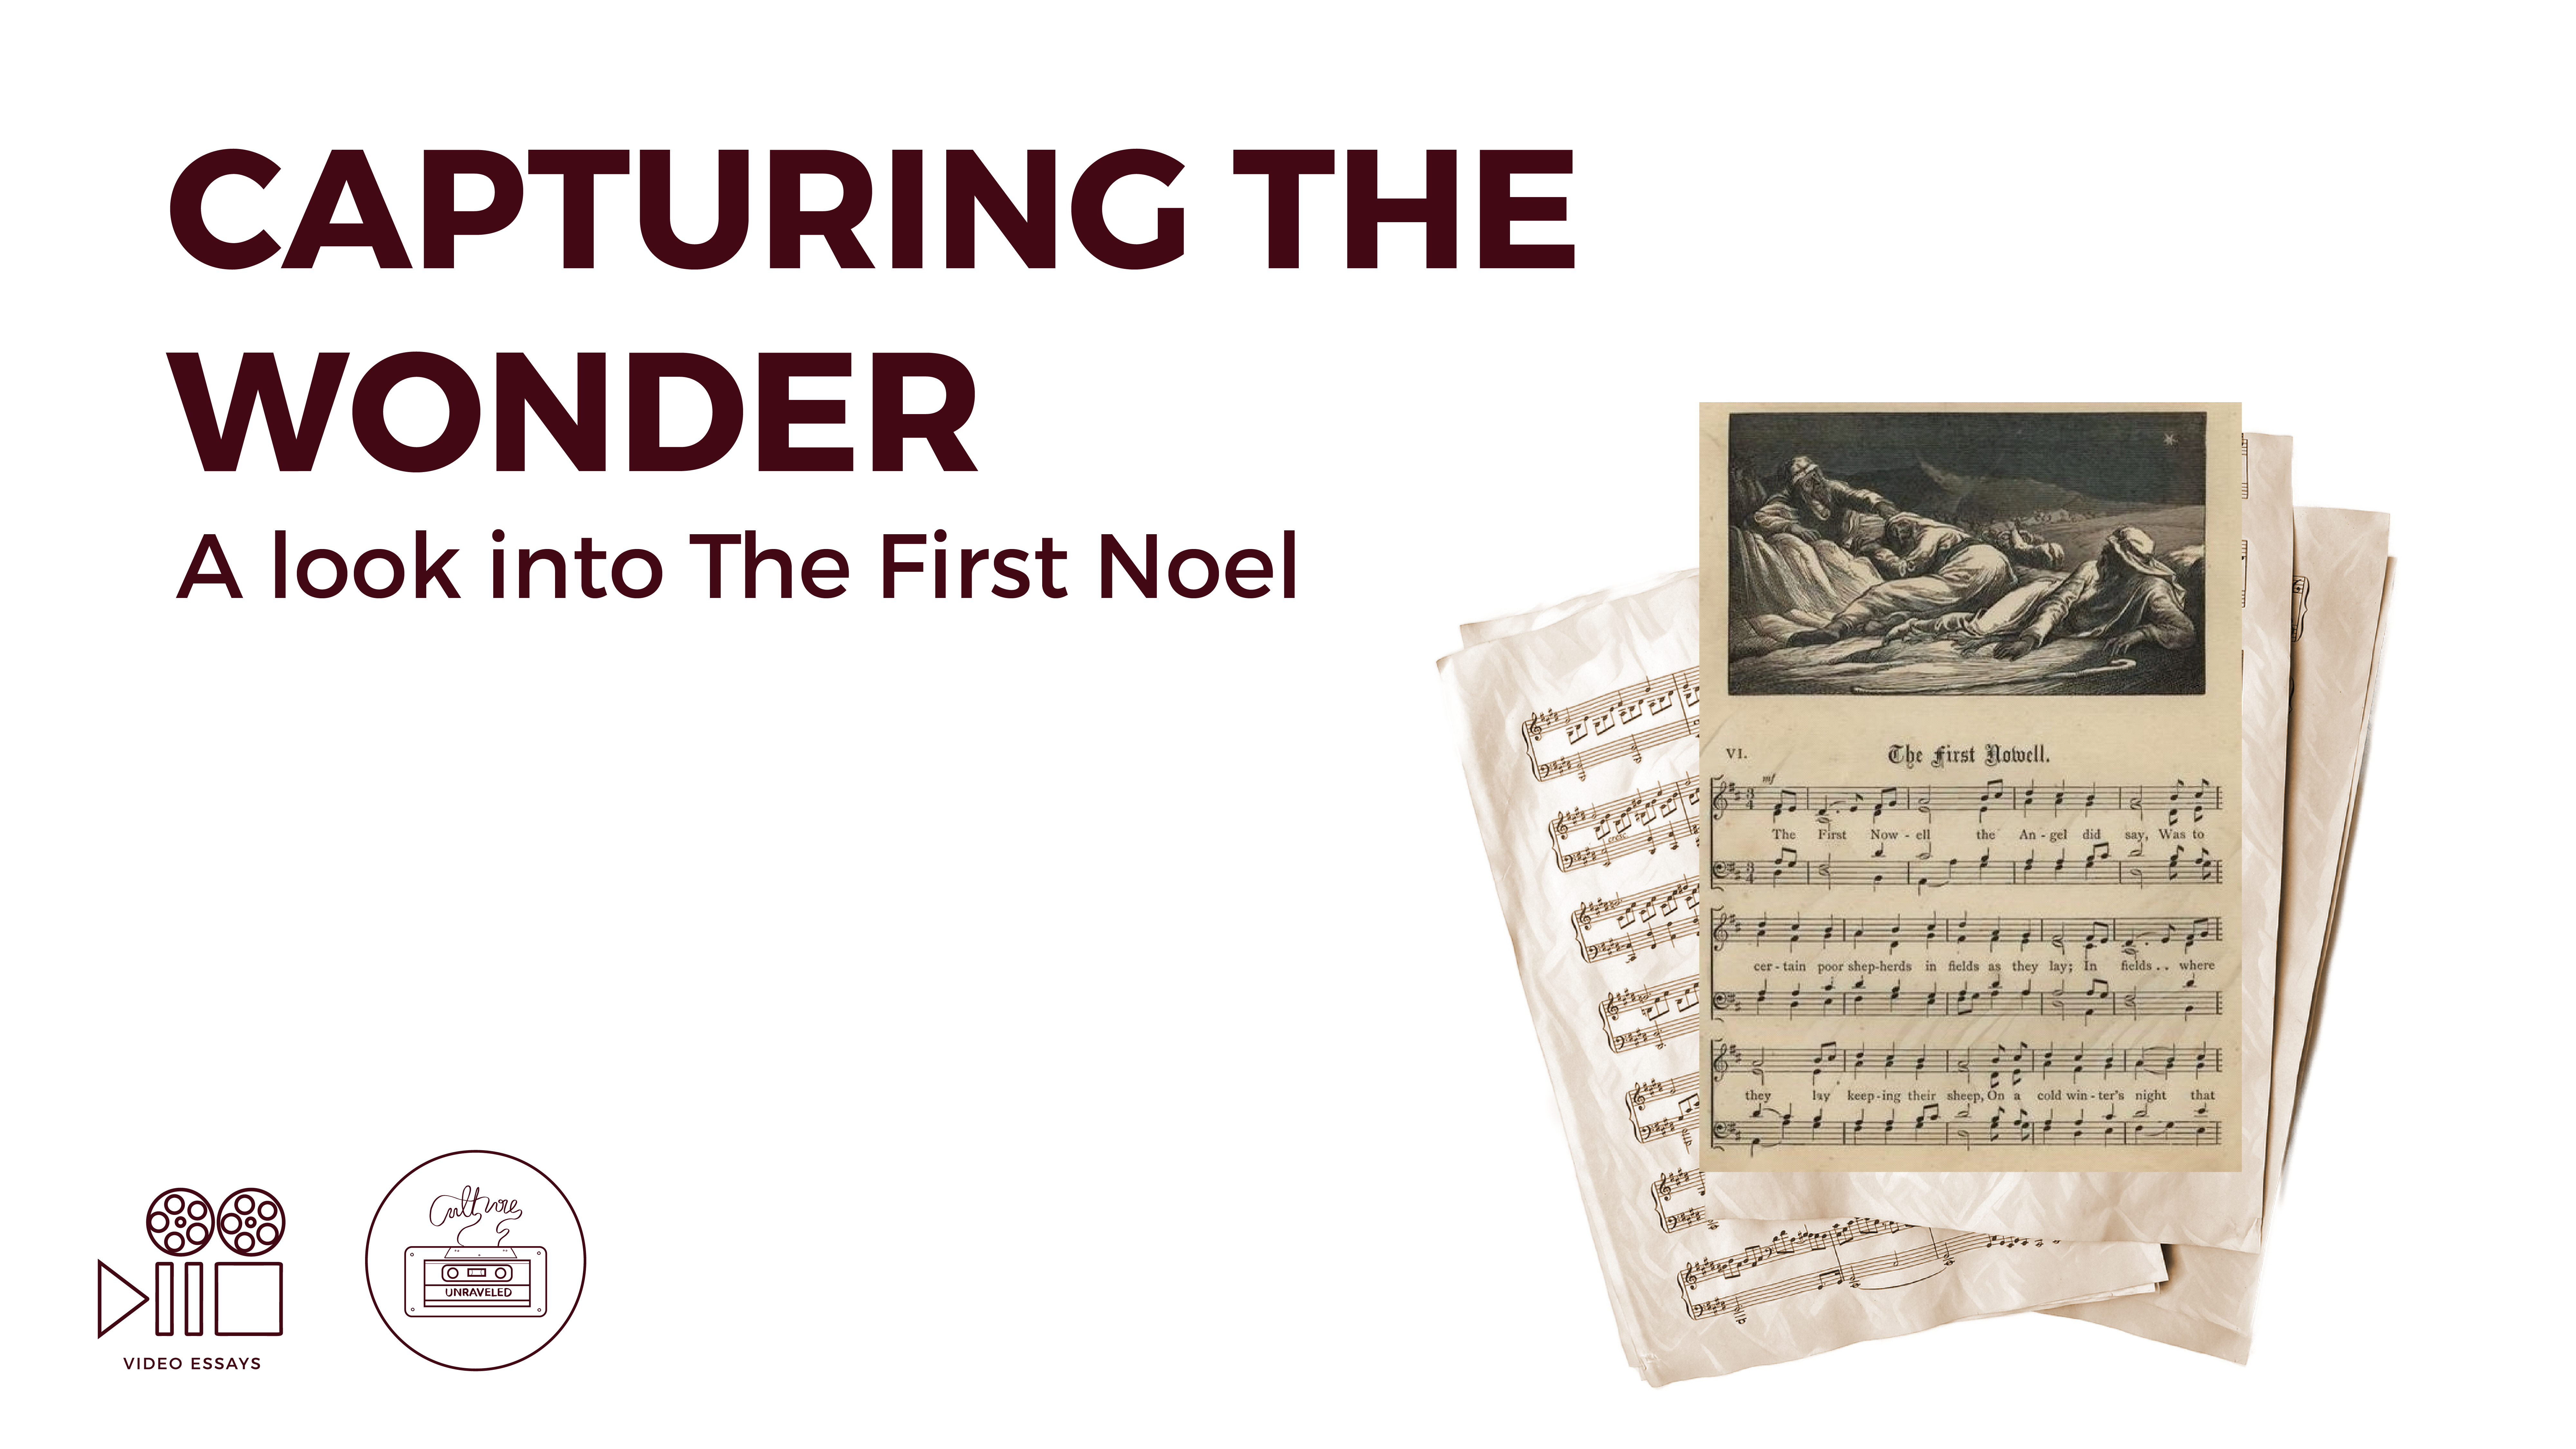 Capturing the Wonder. A Look into The First Noel